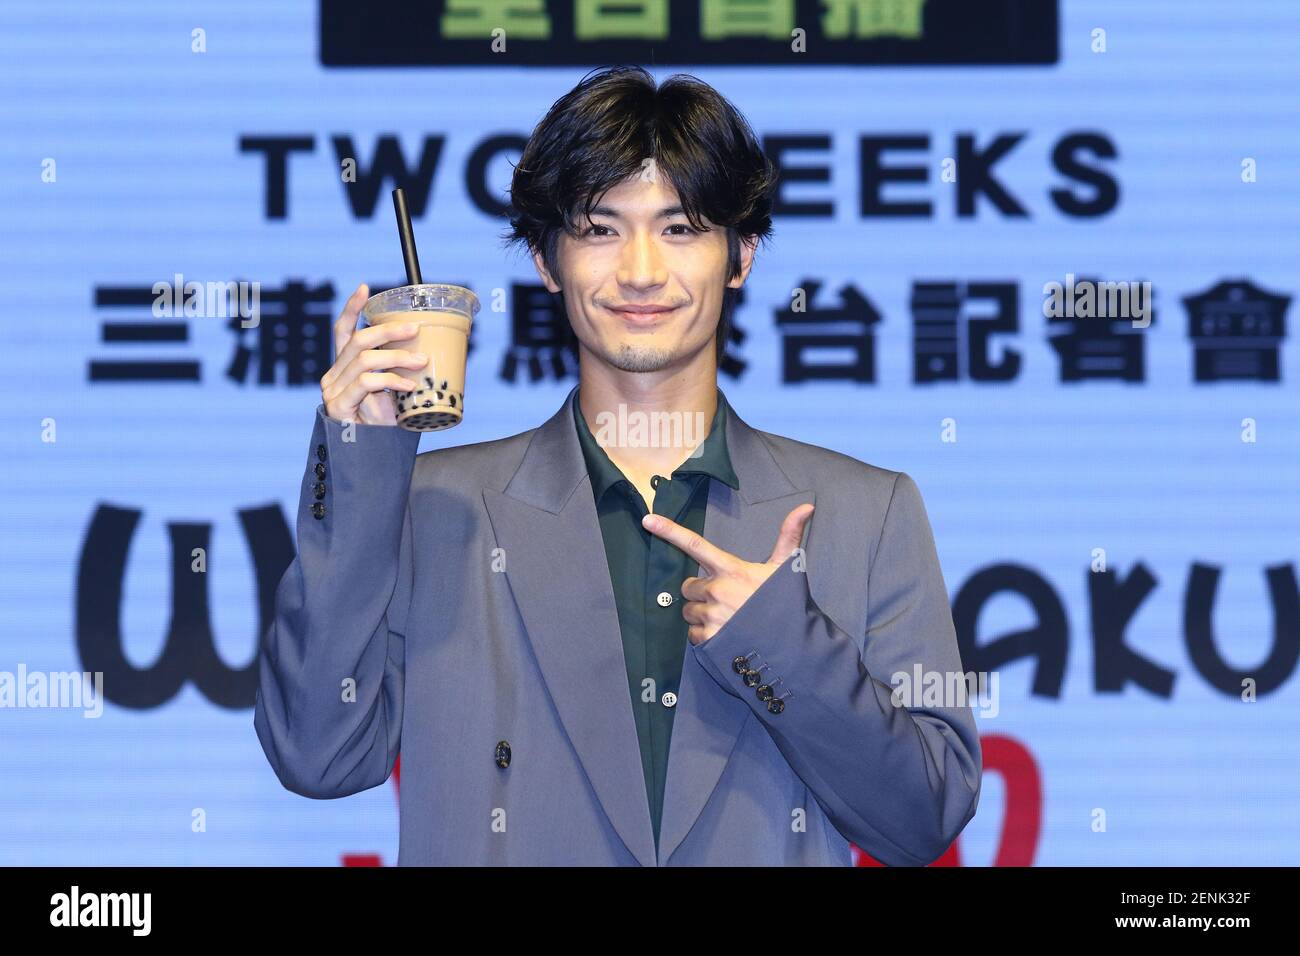 Japanese actor and singer Haruma Miura attends a news conference